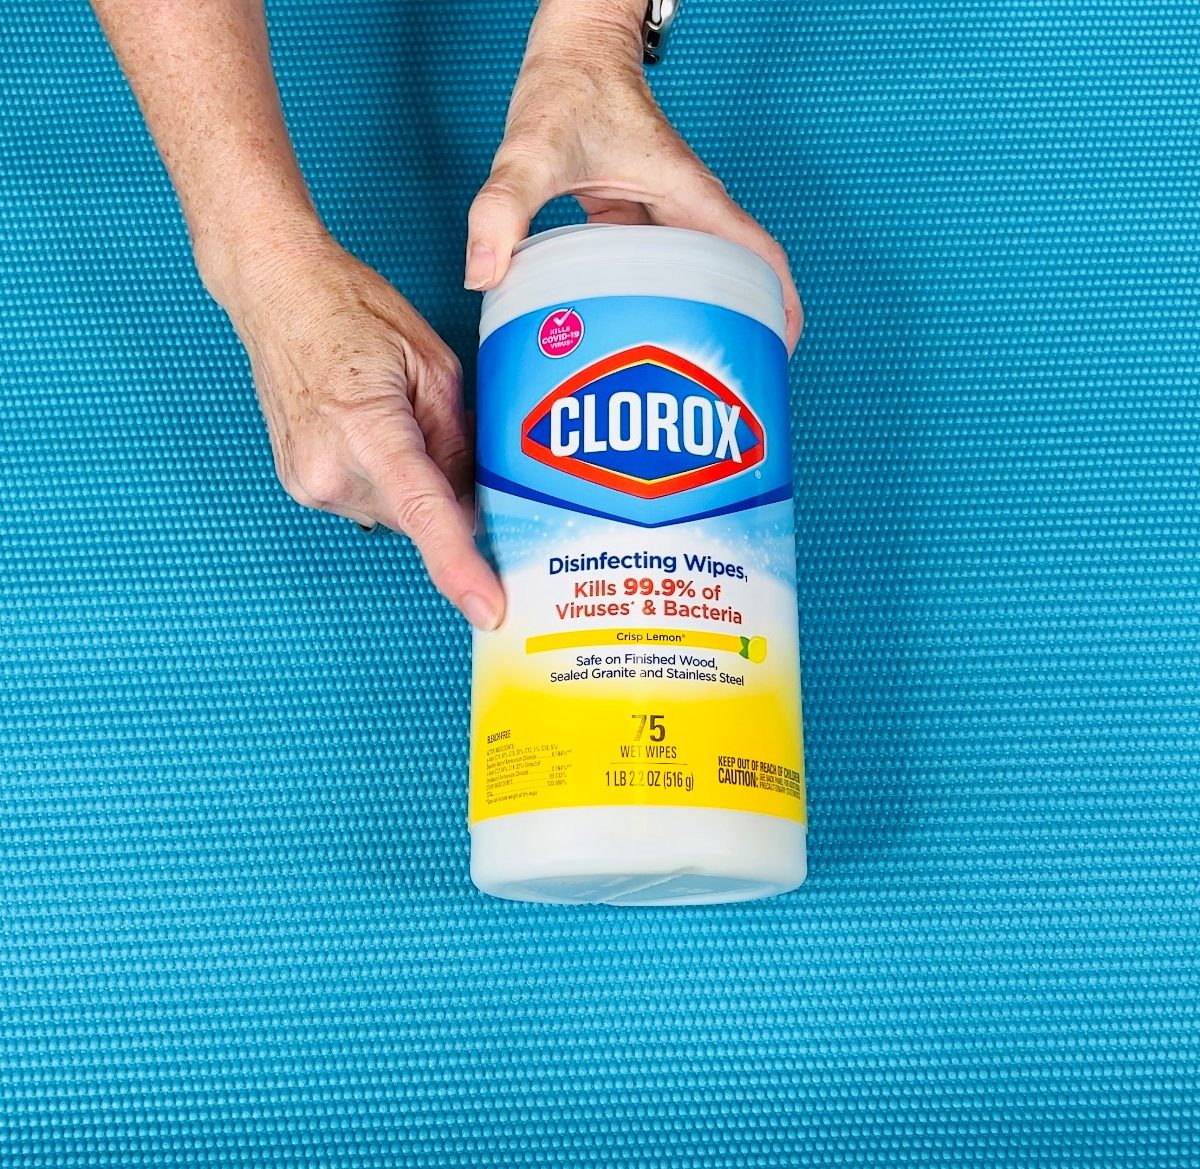 Avoid using a harsh or mild dish soap like Dawn, baking soda, bleach wipes (Clorox or Lysol wipes, Wet Wipes, etc), white vinegar or hydrogen peroxide on your Lululemon or regular yoga mats. These substances can damage the integrity and components of your mat.